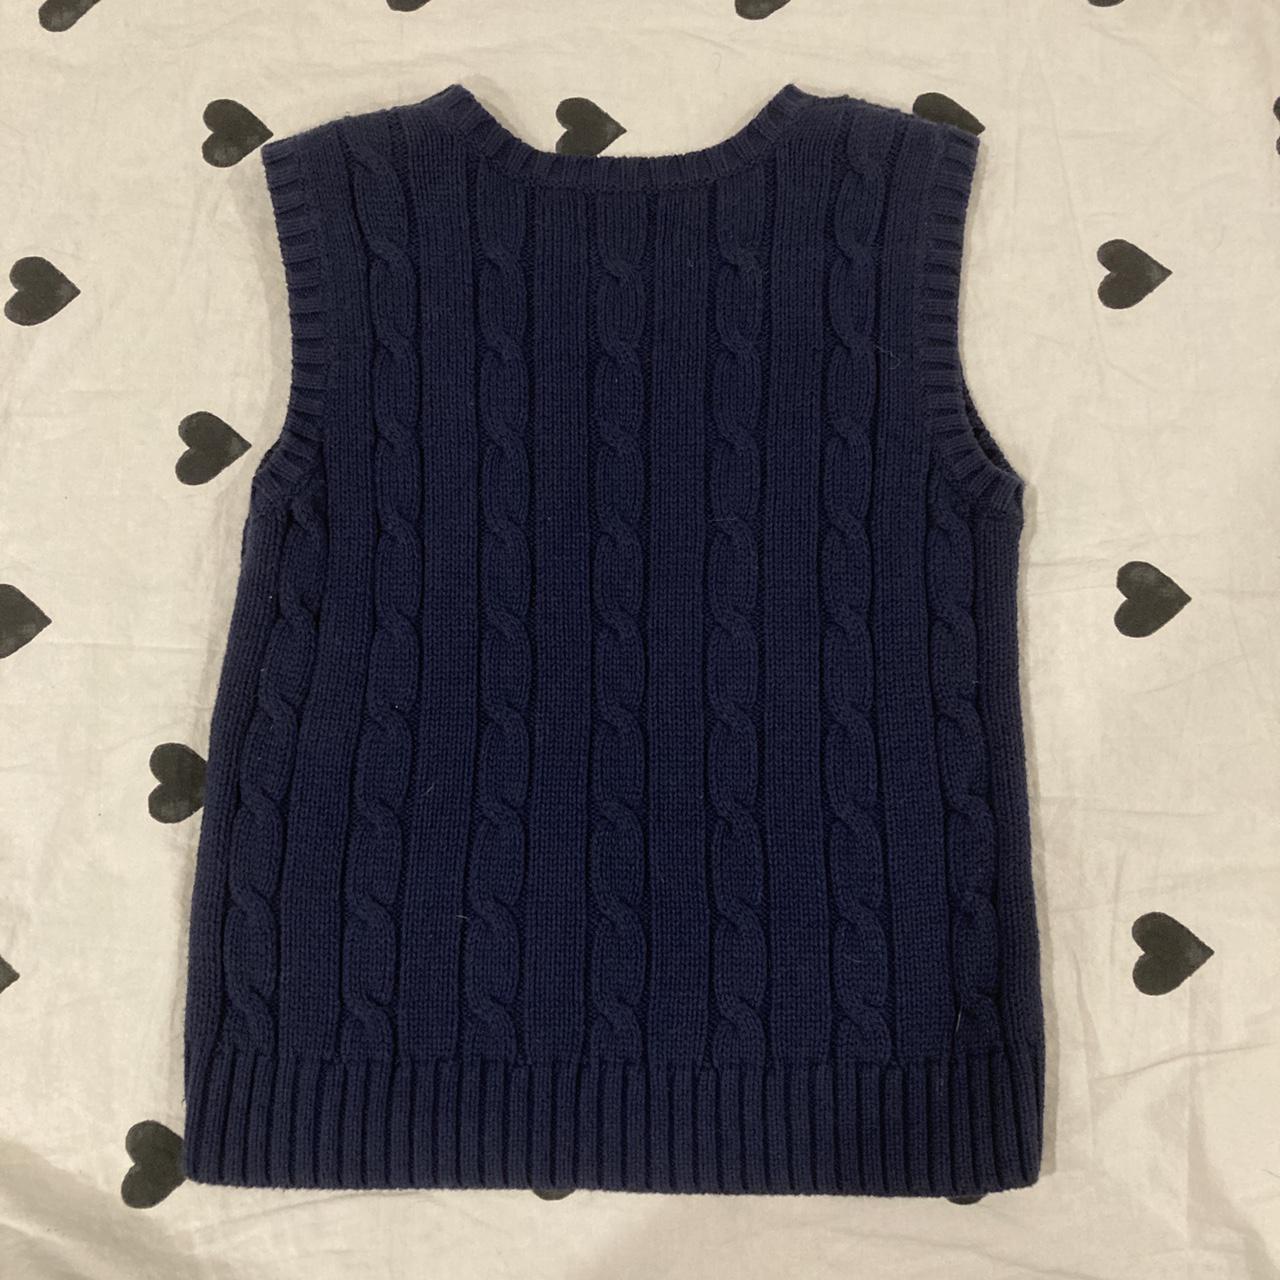 Product Image 2 - Simple navy blue mini sweater